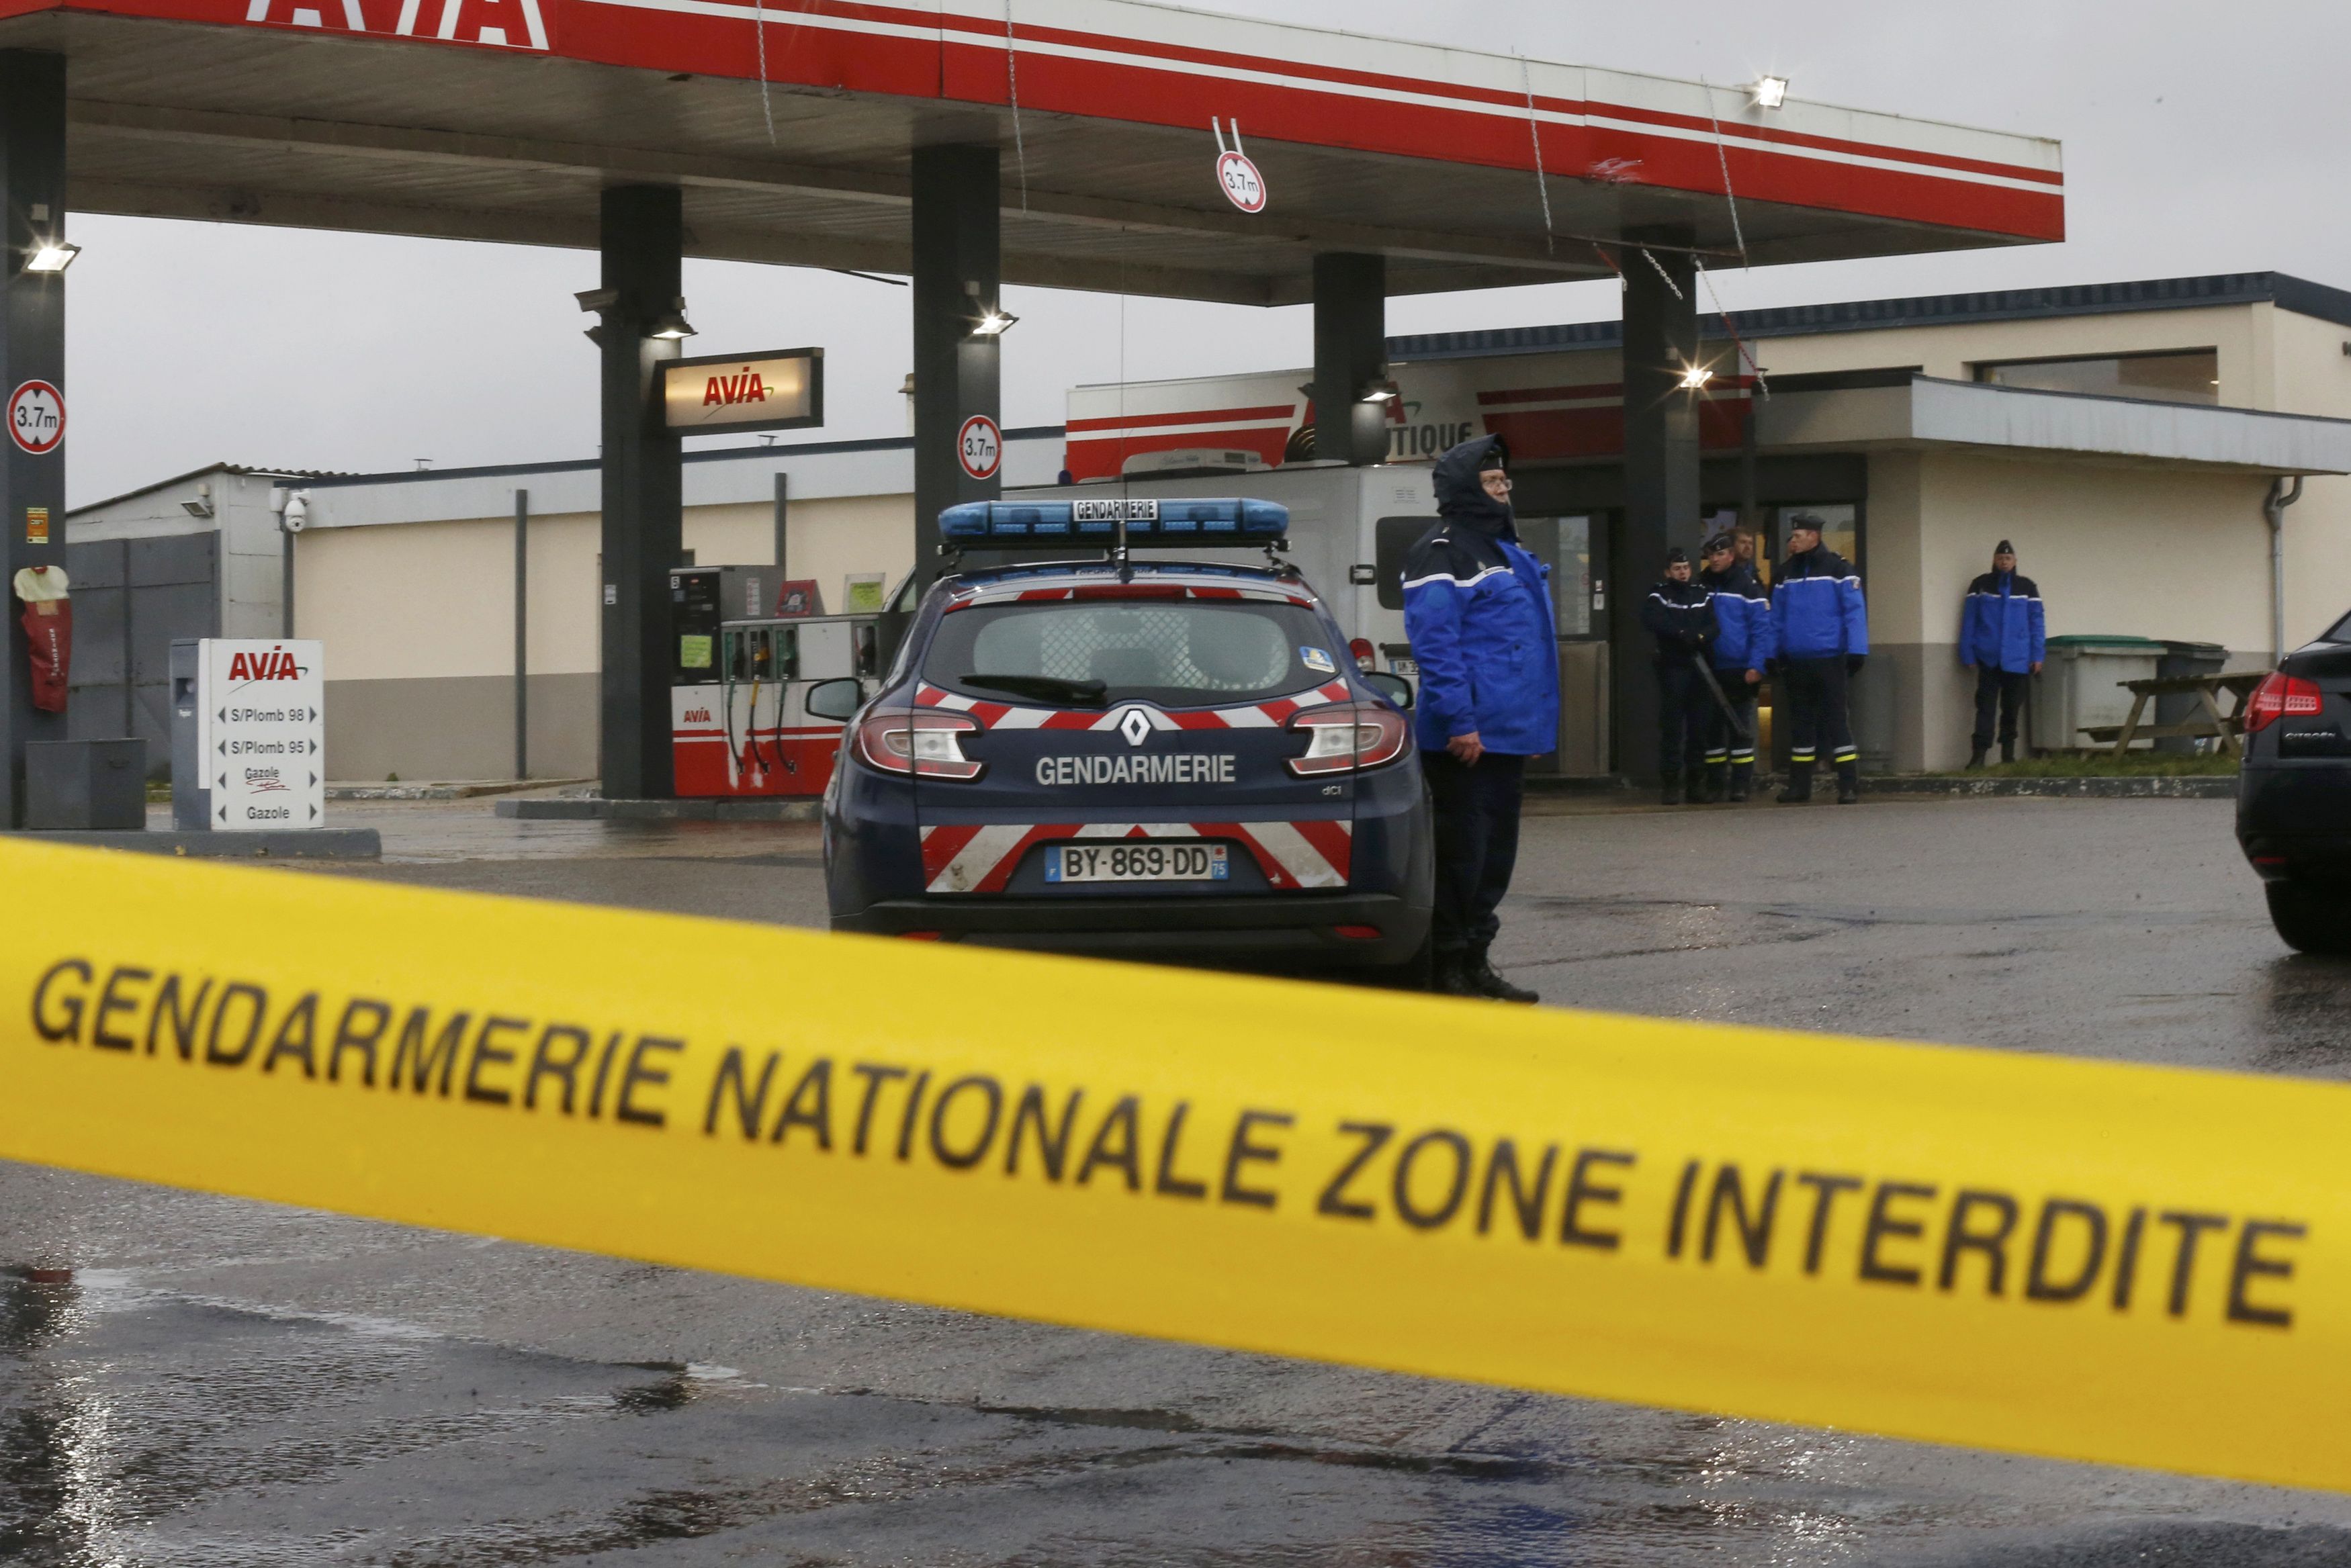 A Gendarmerie cordon is seen at a gas station in Villers-Cotterets, north-east of Paris, January 8, 2015, where armed suspects from the attack on French satirical weekly newspaper Charlie Hebdo were spotted in a car. French police extended a manhunt on Thursday for two brothers suspected of killing 12 people at the weekly satirical newspaper Charlie Hebdo in Paris in a presumed Islamist militant strike that national leaders and allied states described as an assault on democracy. France began a day of mourning for the journalists and police officers shot dead on Wednesday morning by black-hooded gunmen using Kalashnikov assault rifles. French tricolour flags flew at half mast throughout the country. REUTERS/Pascal Rossignol (FRANCE - Tags: CRIME LAW MILITARY)